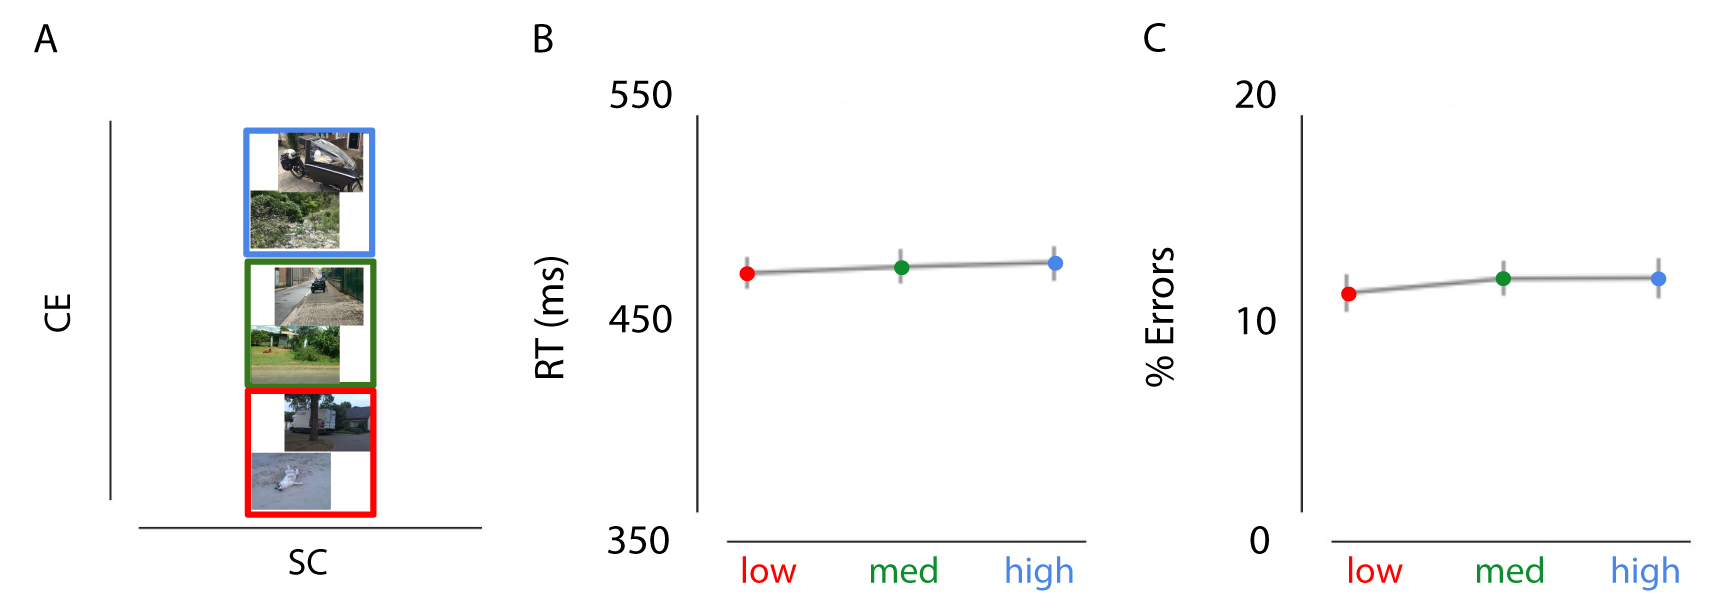 Effects of CE (controlling for Spatial Coherence) on decision-making. A) Examples of the stimuli used in experiment 2b. Images only varied in CE, while SC was kept constant (red = low CE, green = medium CE, blue = high CE). B/C) Results of experiment 2b showed no influence of CE on RT or percentage or errors.